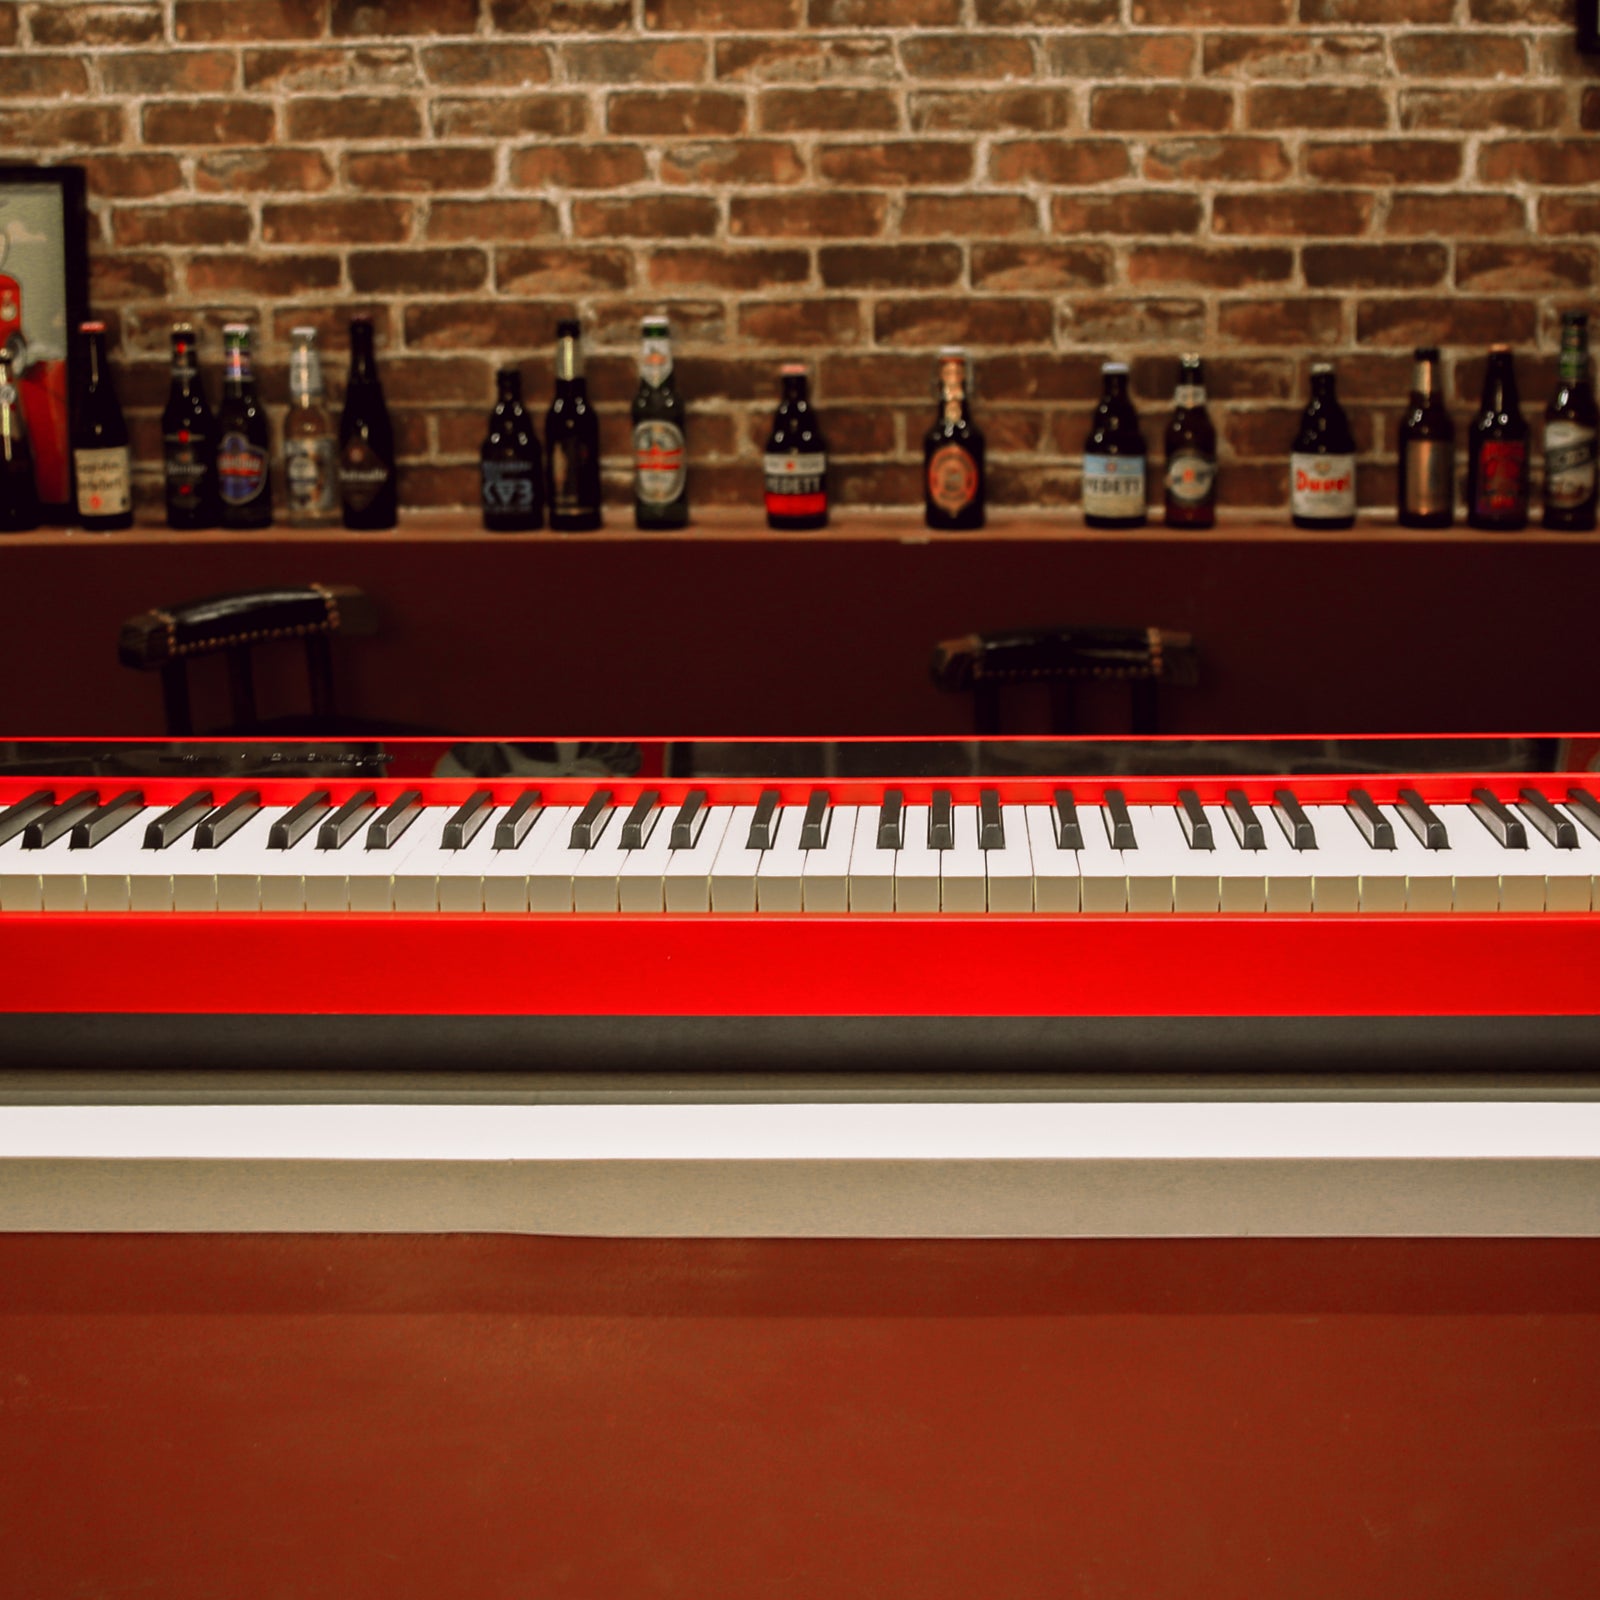 NUX Digital Piano -NPK-10 (Red) - with wooden stand NPS-1